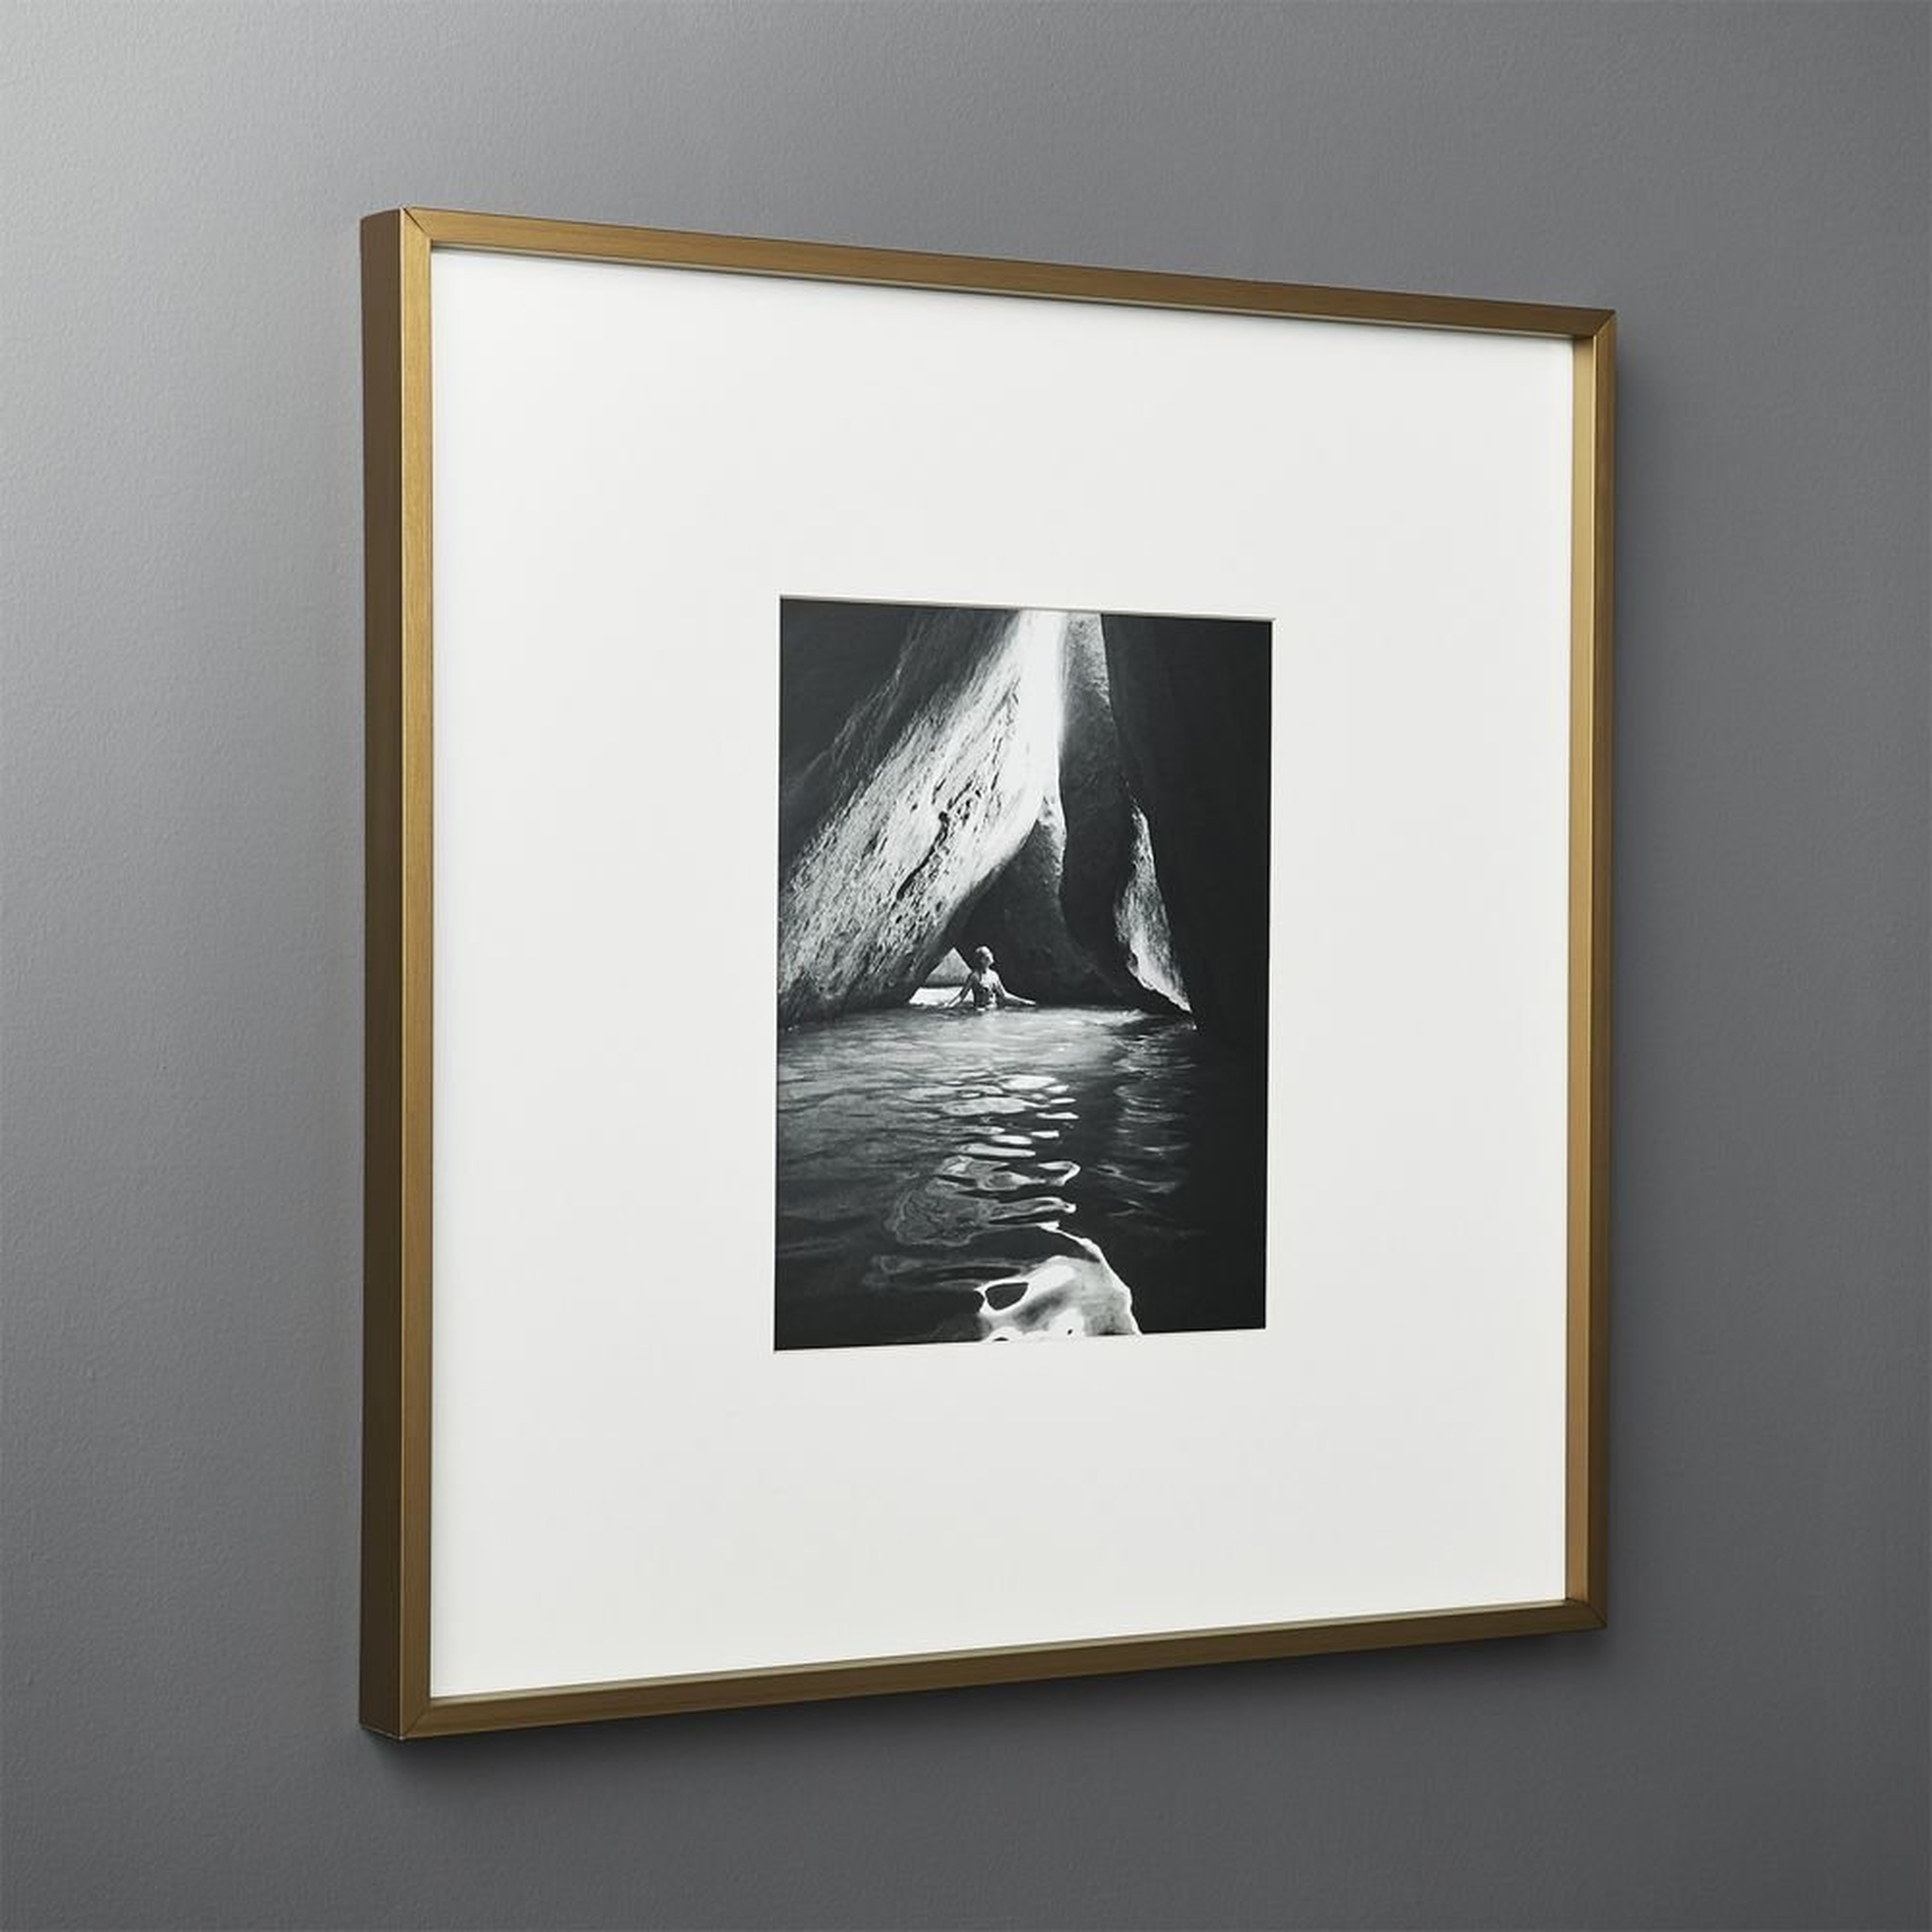 Gallery Brass Frame with White Mat 8x10 - CB2